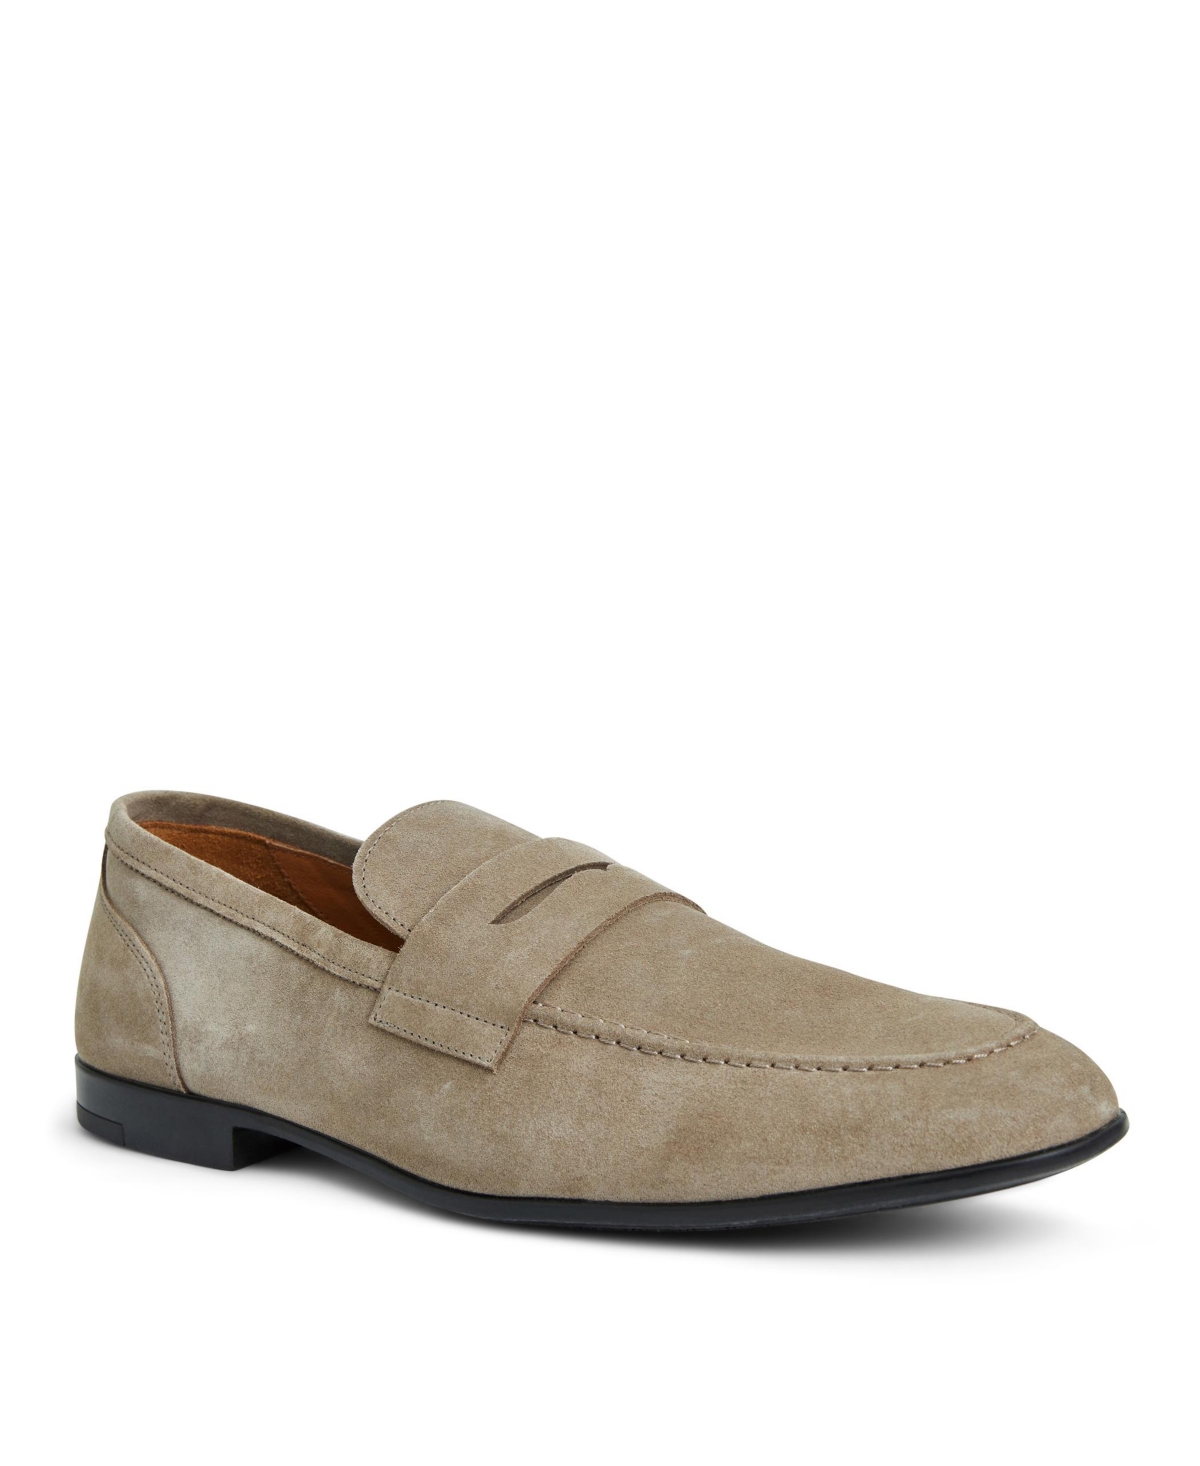 Men's Lastra Suede Penny Loafers - Sand Suede